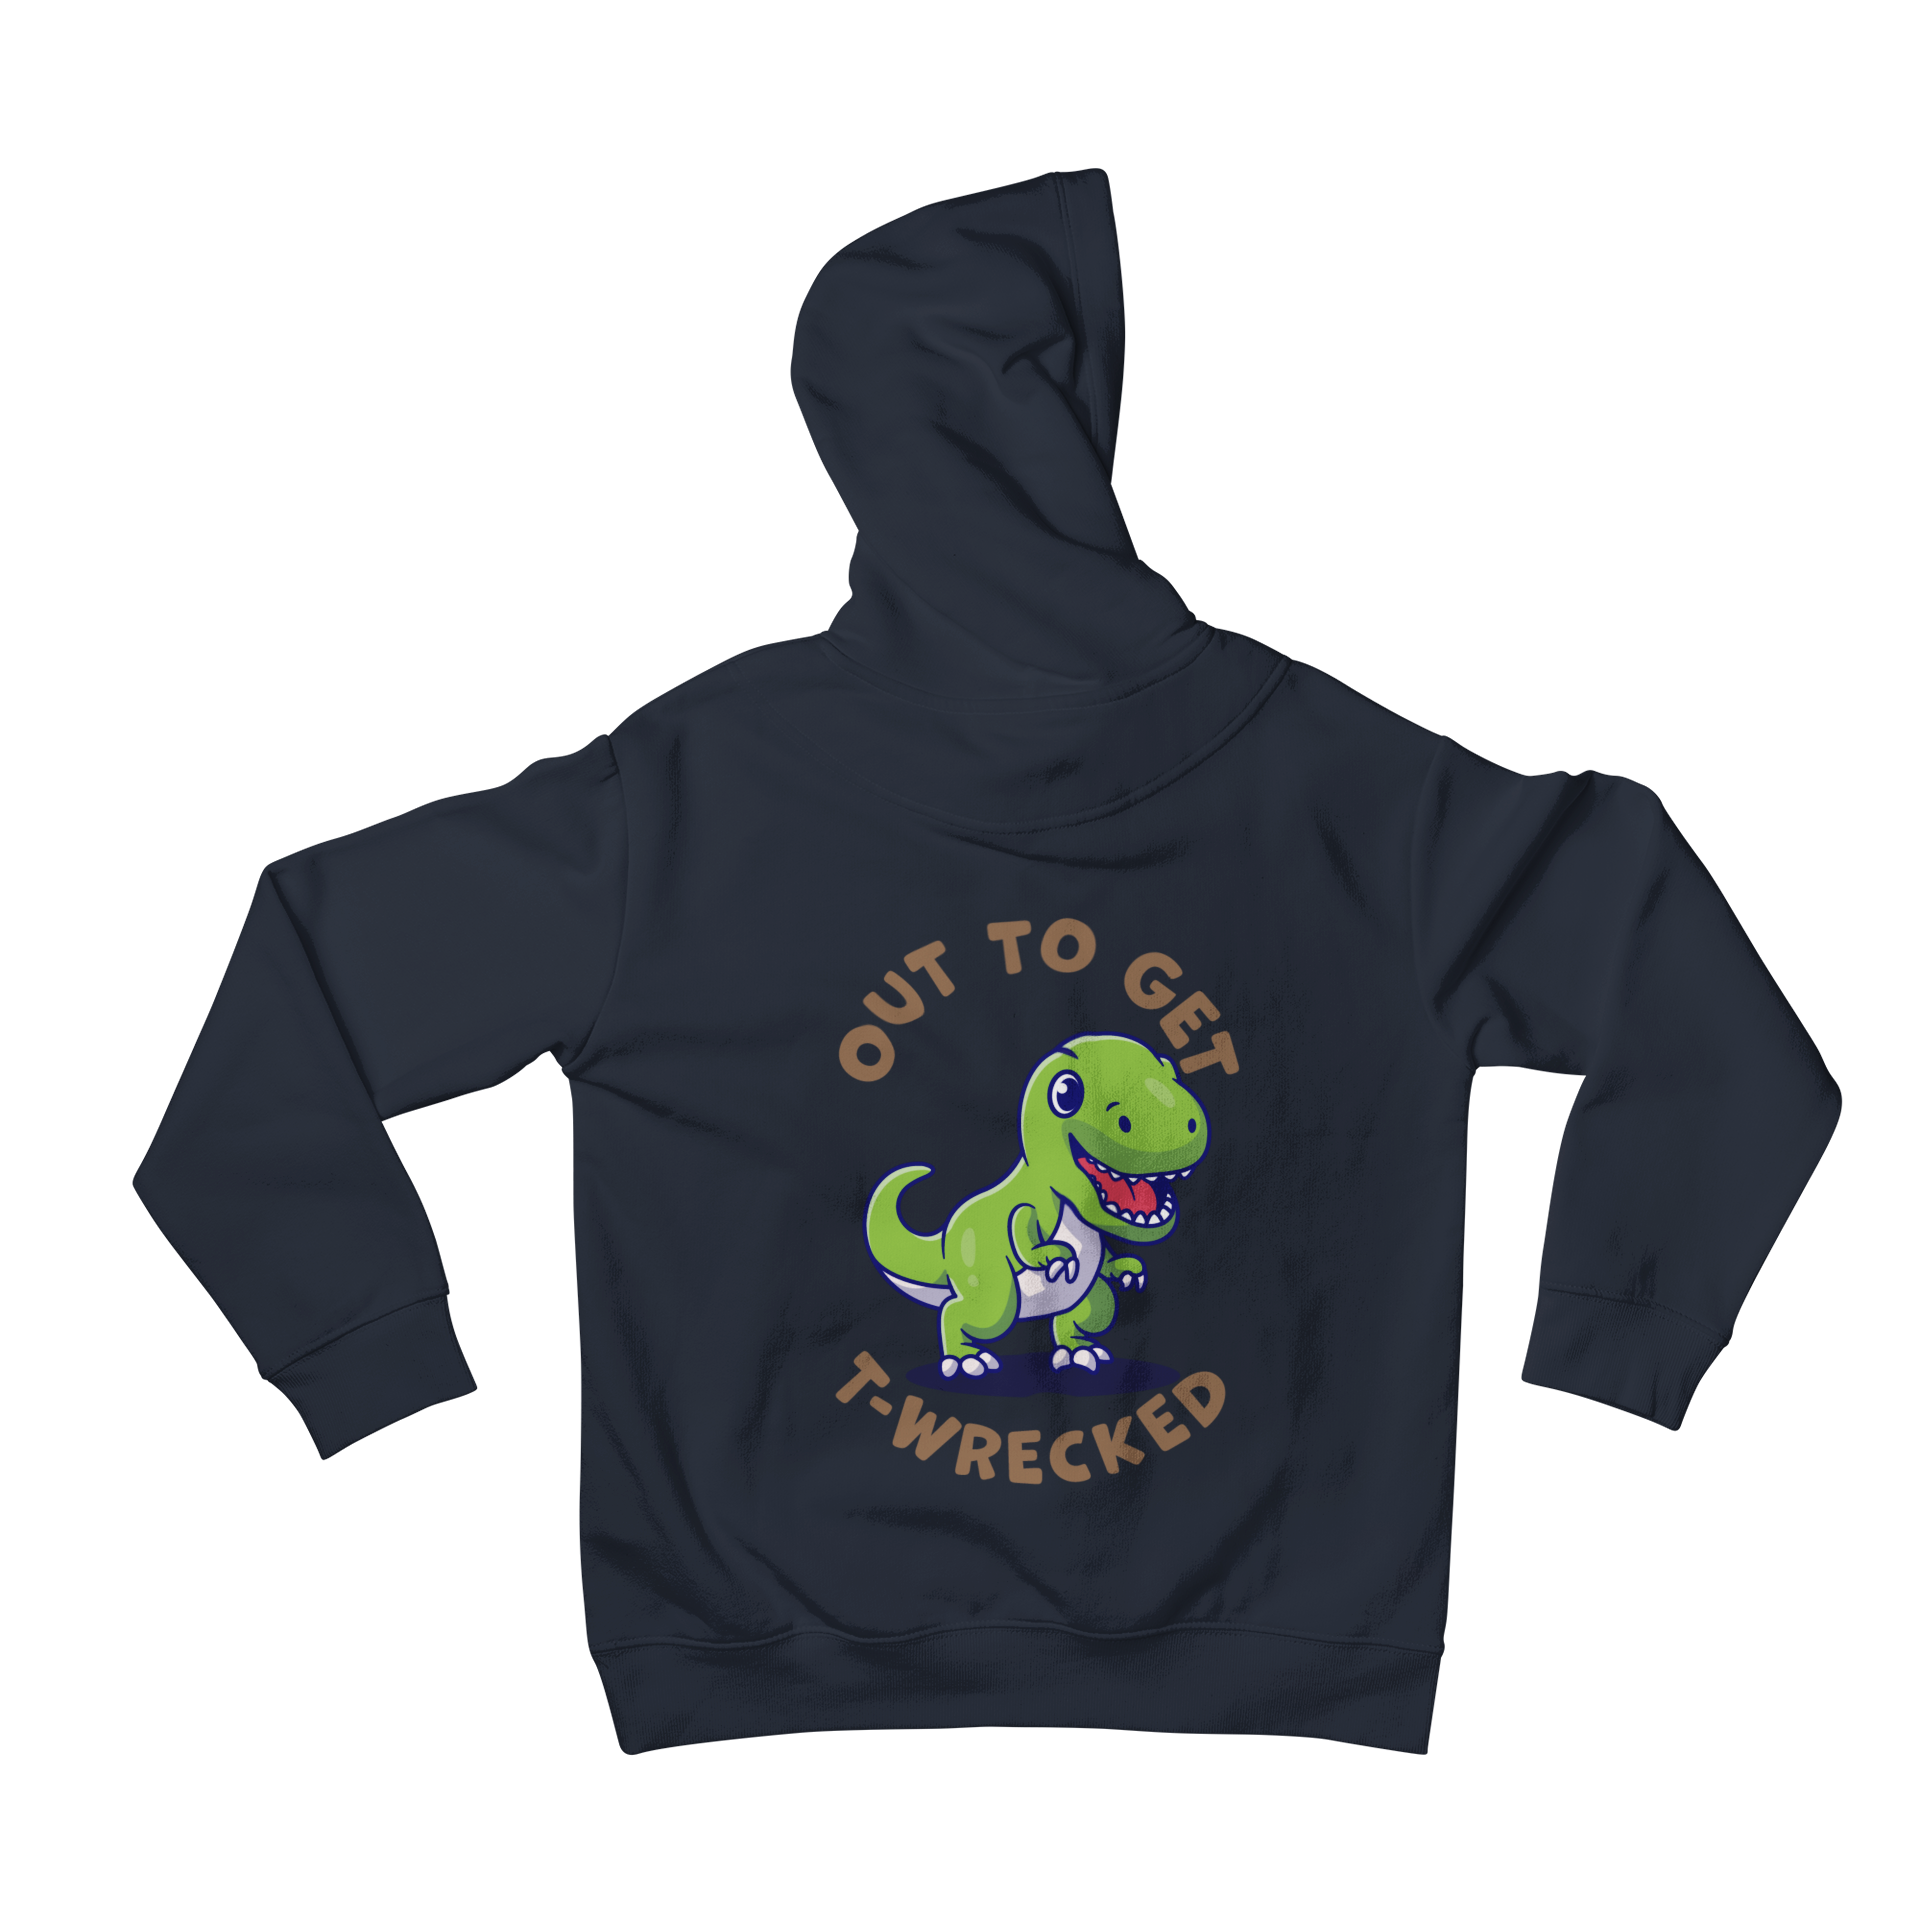 Looking for a funny and unique hoodie? Teevolution has a hilarious dinosaur back print hoodie that features a cartoon T-Rex and the phrase "Out to get T-Wrecked." Our hoodie is perfect for any casual occasion and is sure to get you lots of compliments. Get ready to stand out with Teevolution!